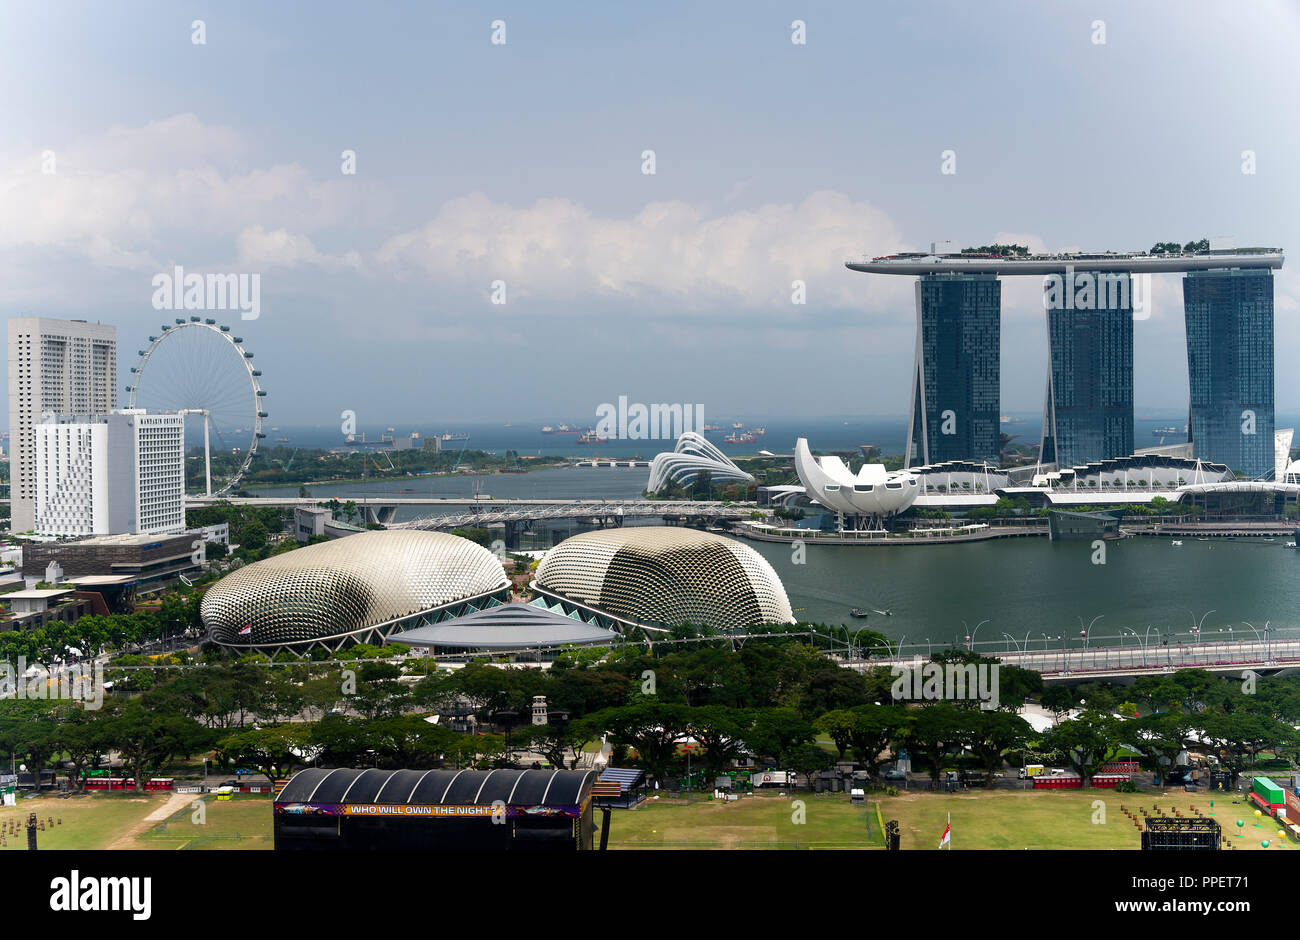 Aerial View of  The Padang, Esplanade Theatres, Singapore Flyer, Artscience Museum, Marina Bay Sands Hotel Complex Republic of Singapore Asia Stock Photo